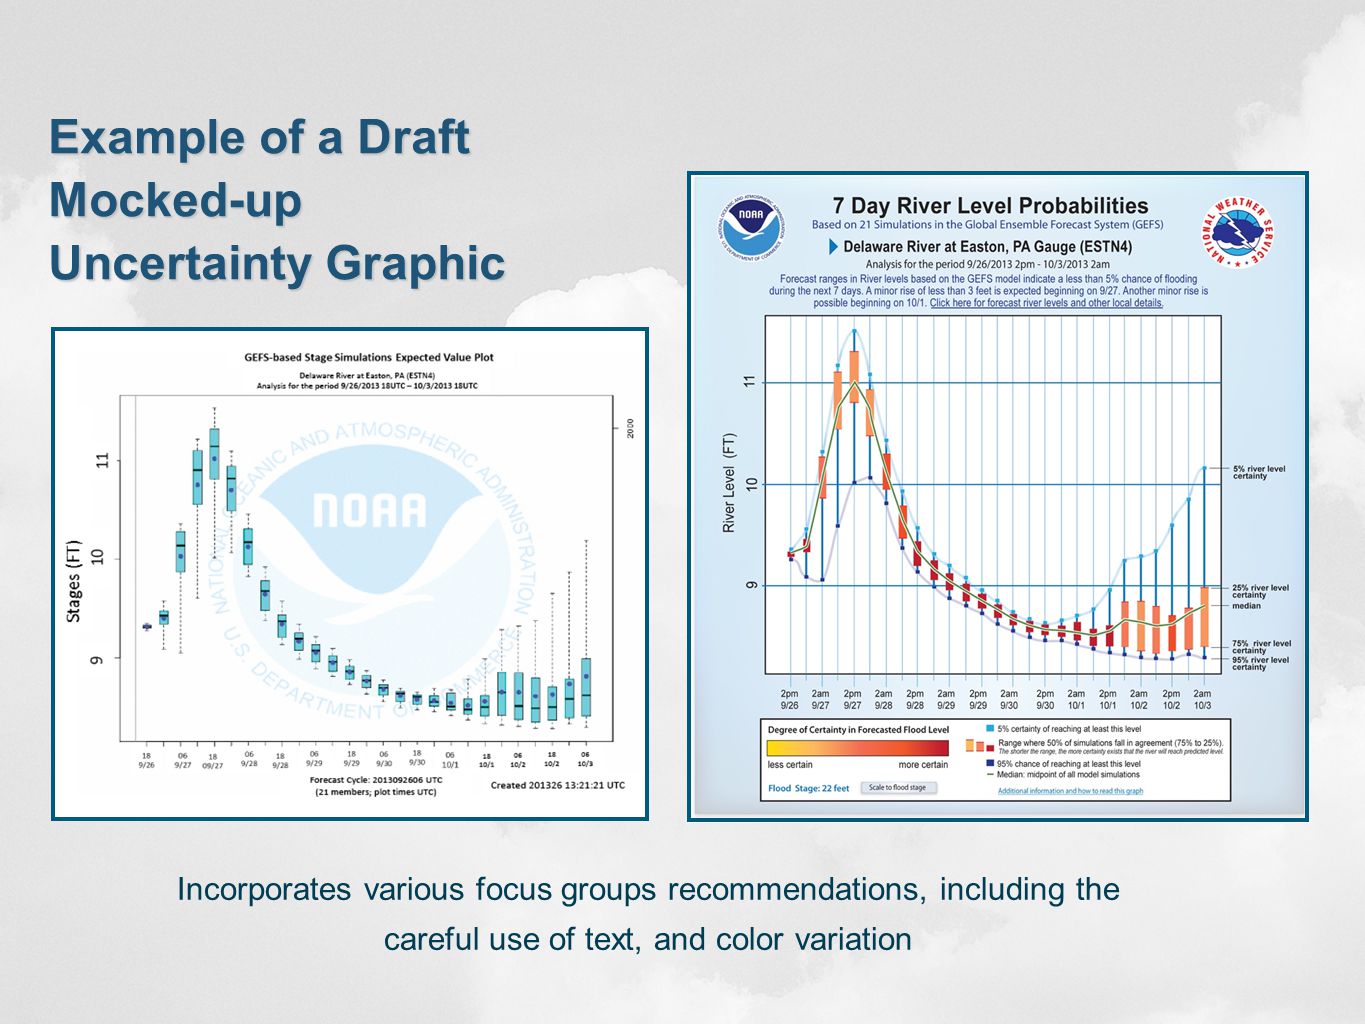 Example of a Draft Mocked-up Uncertainty Graphic Incorporates various focus groups recommendations, including the careful use of text, and color variation